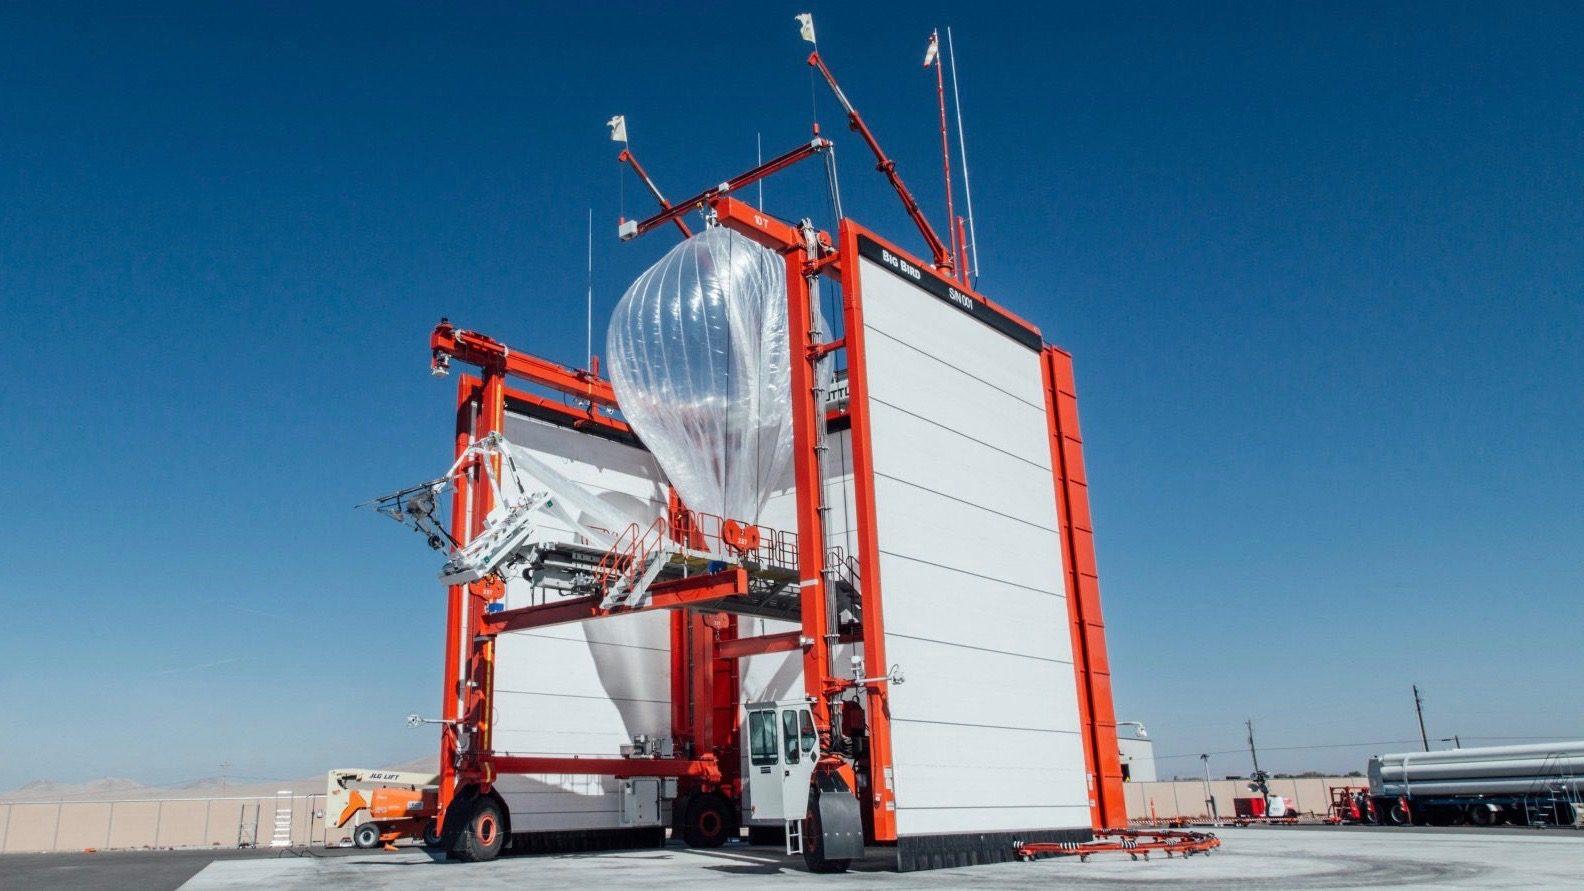 project loon_launcher_technosports.co.in.jpg